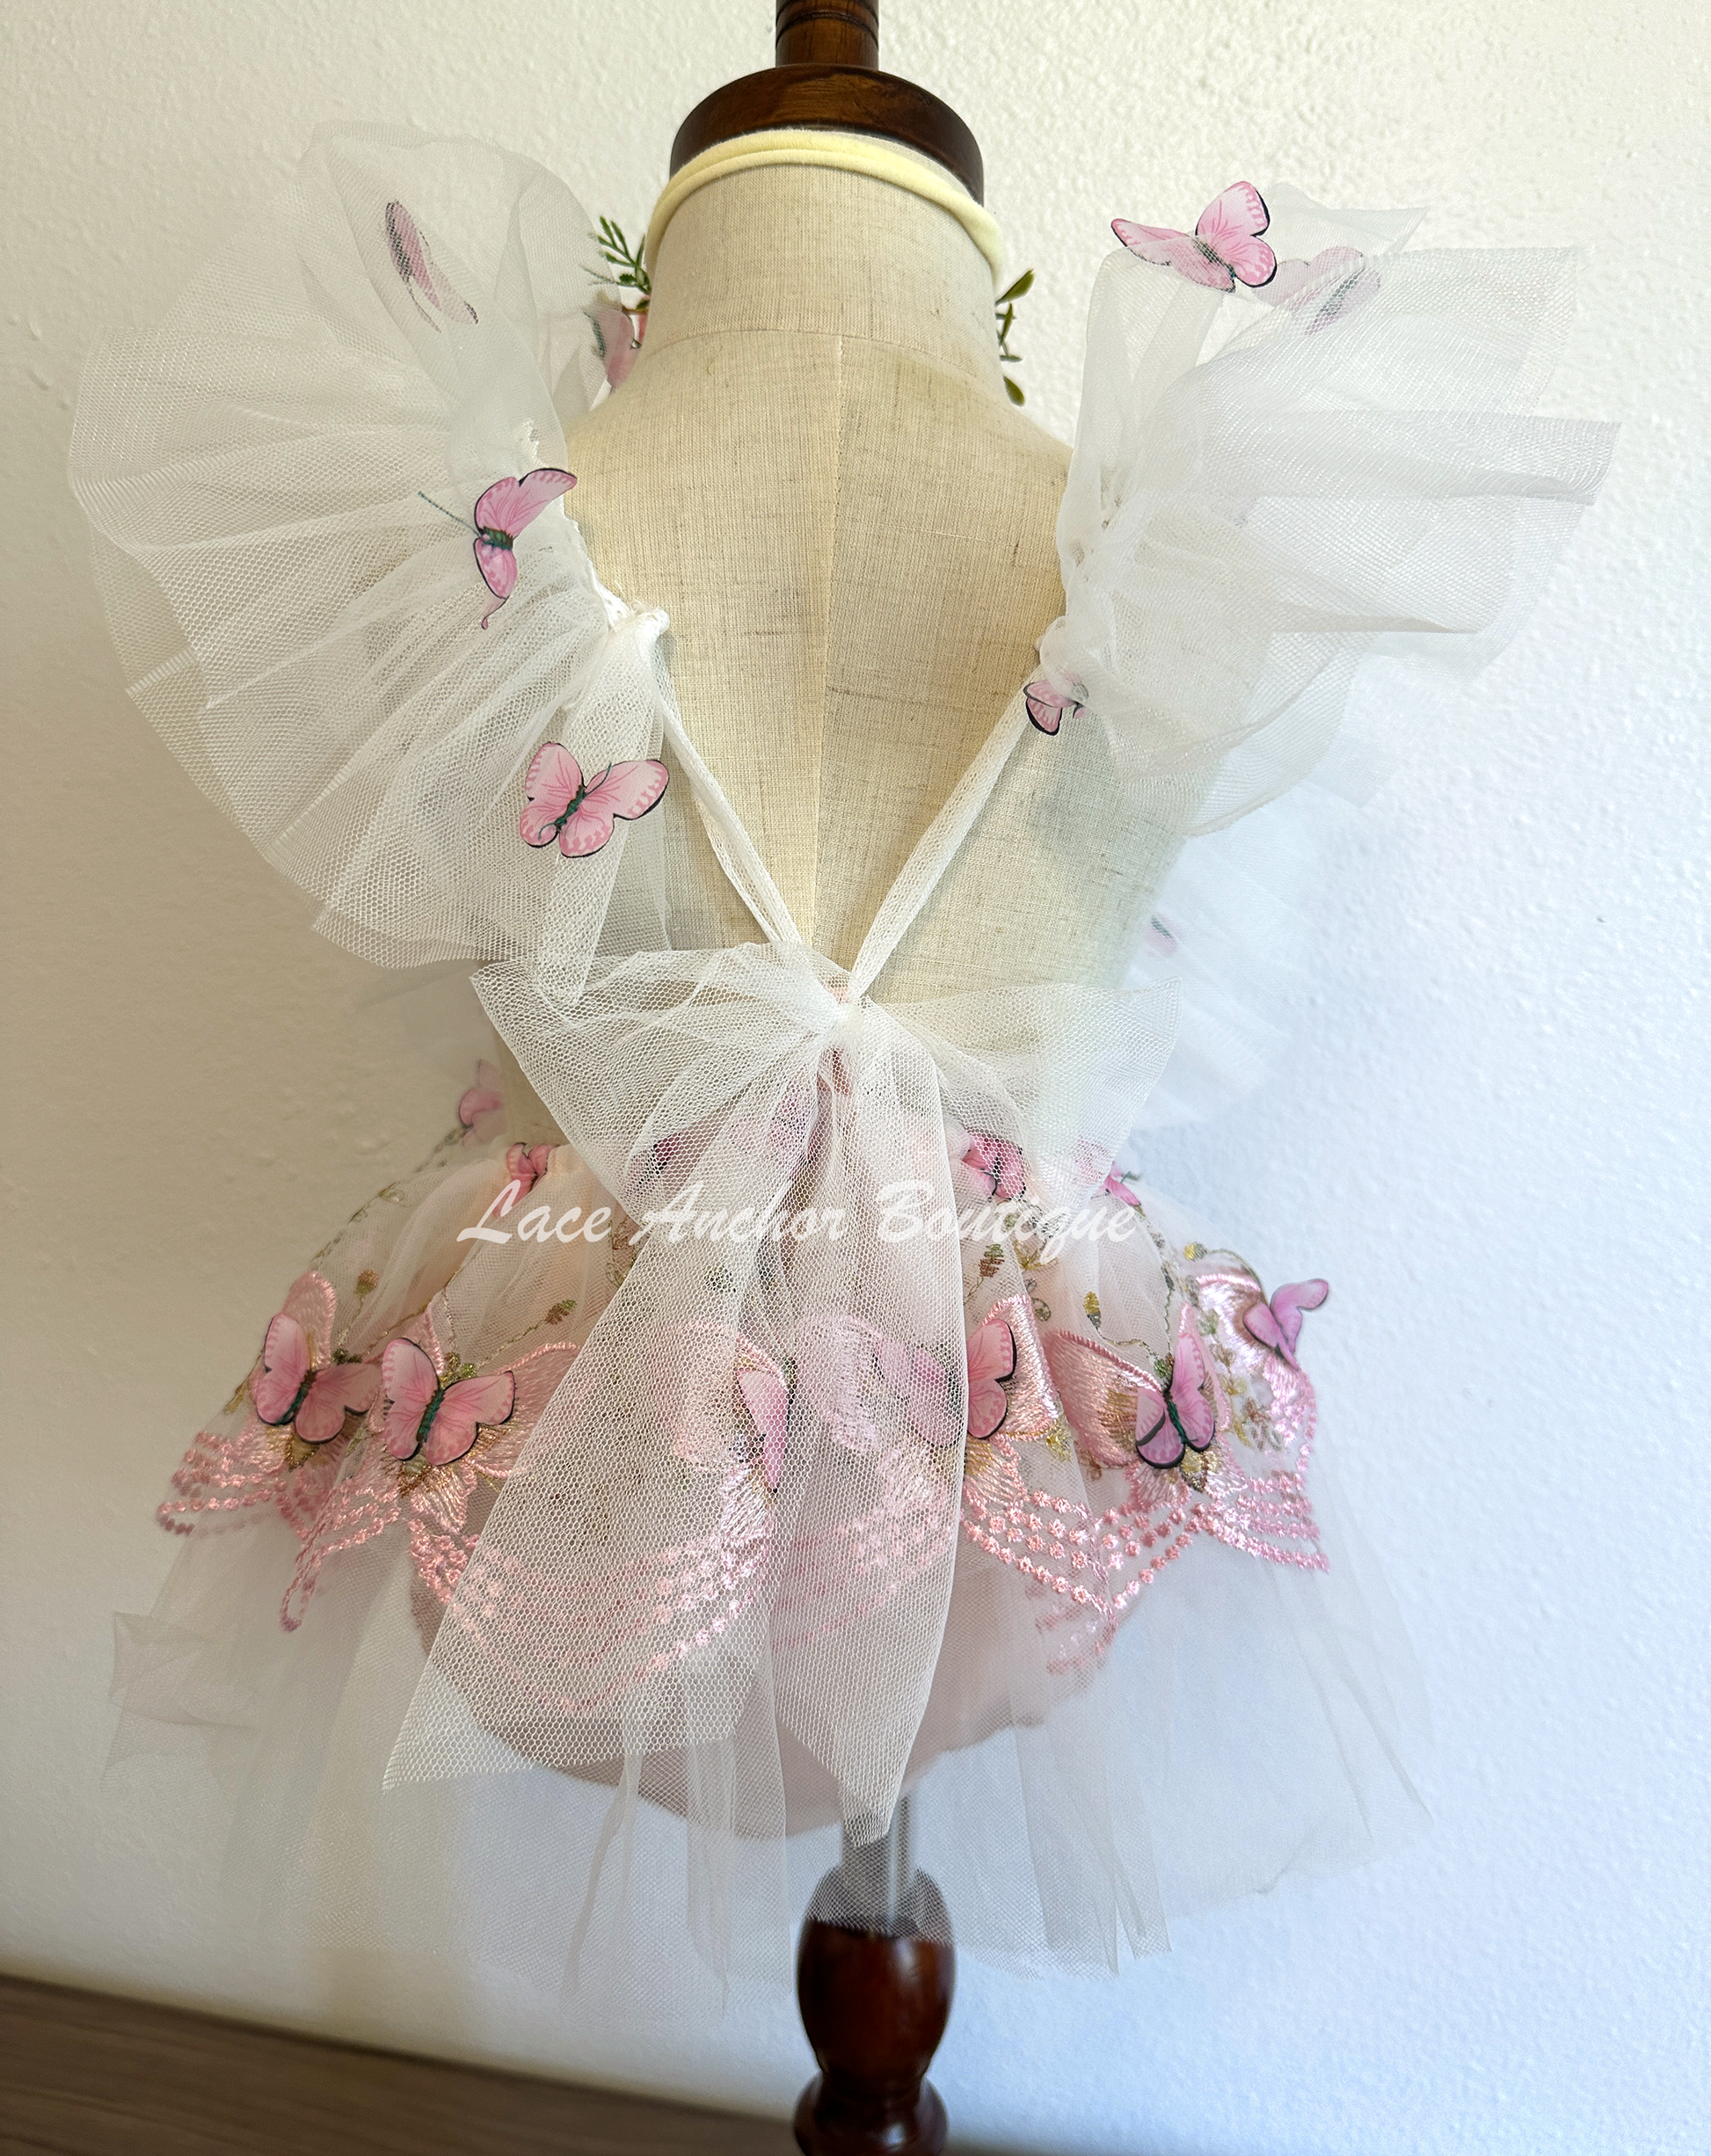 baby girls romper with flutter sleeves and skirt. Made of tulle with embroidered floral design and matching realistic butterflies all over in blush light pink.